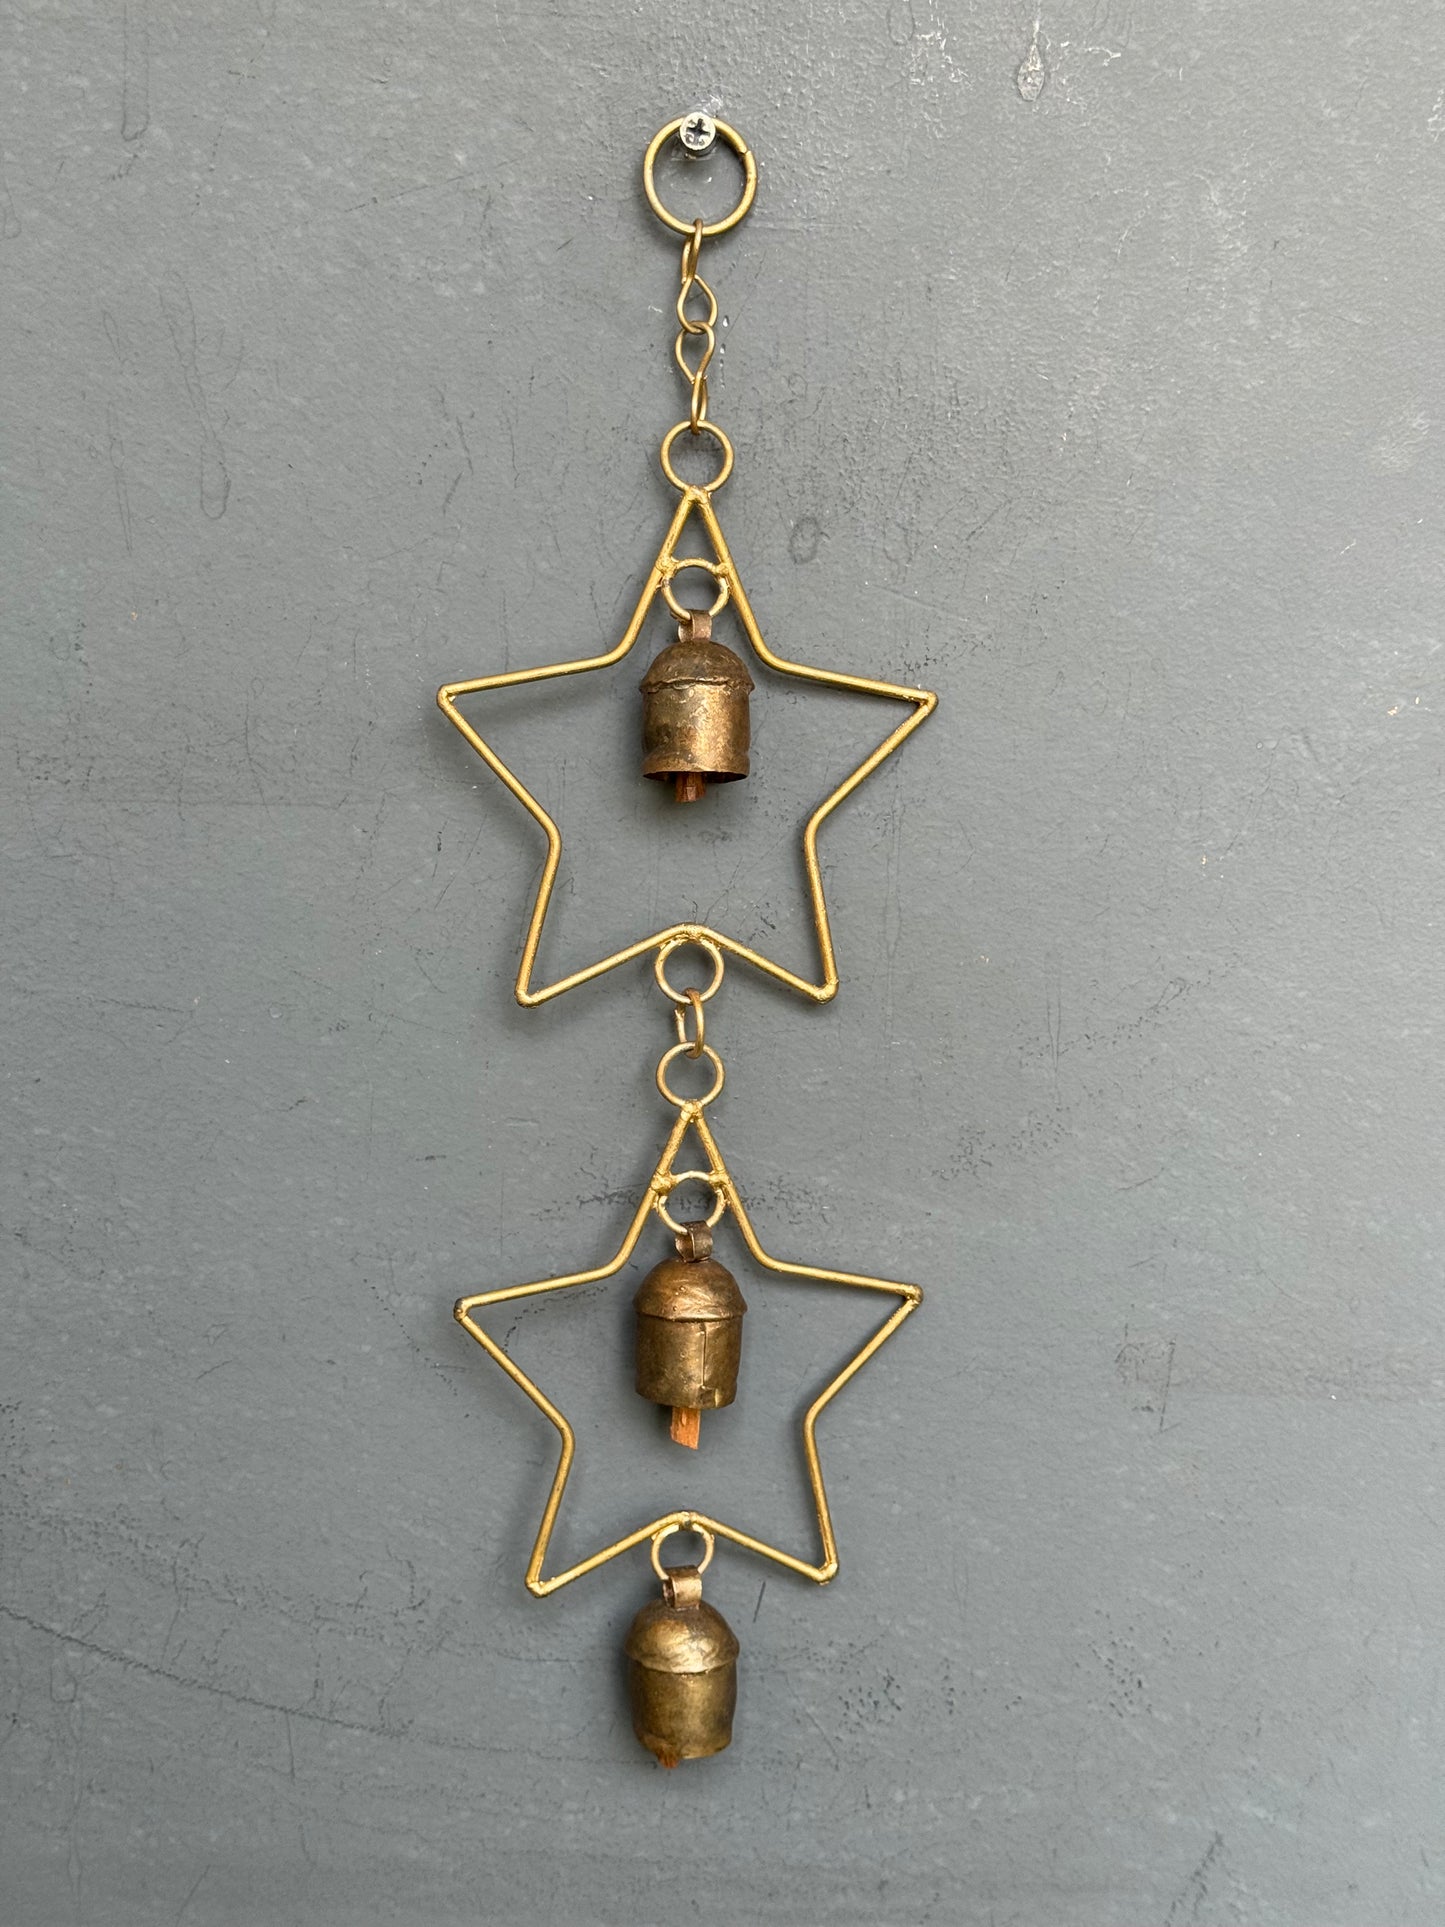 2 stars handcrafted copper bell hanging with 3 bells